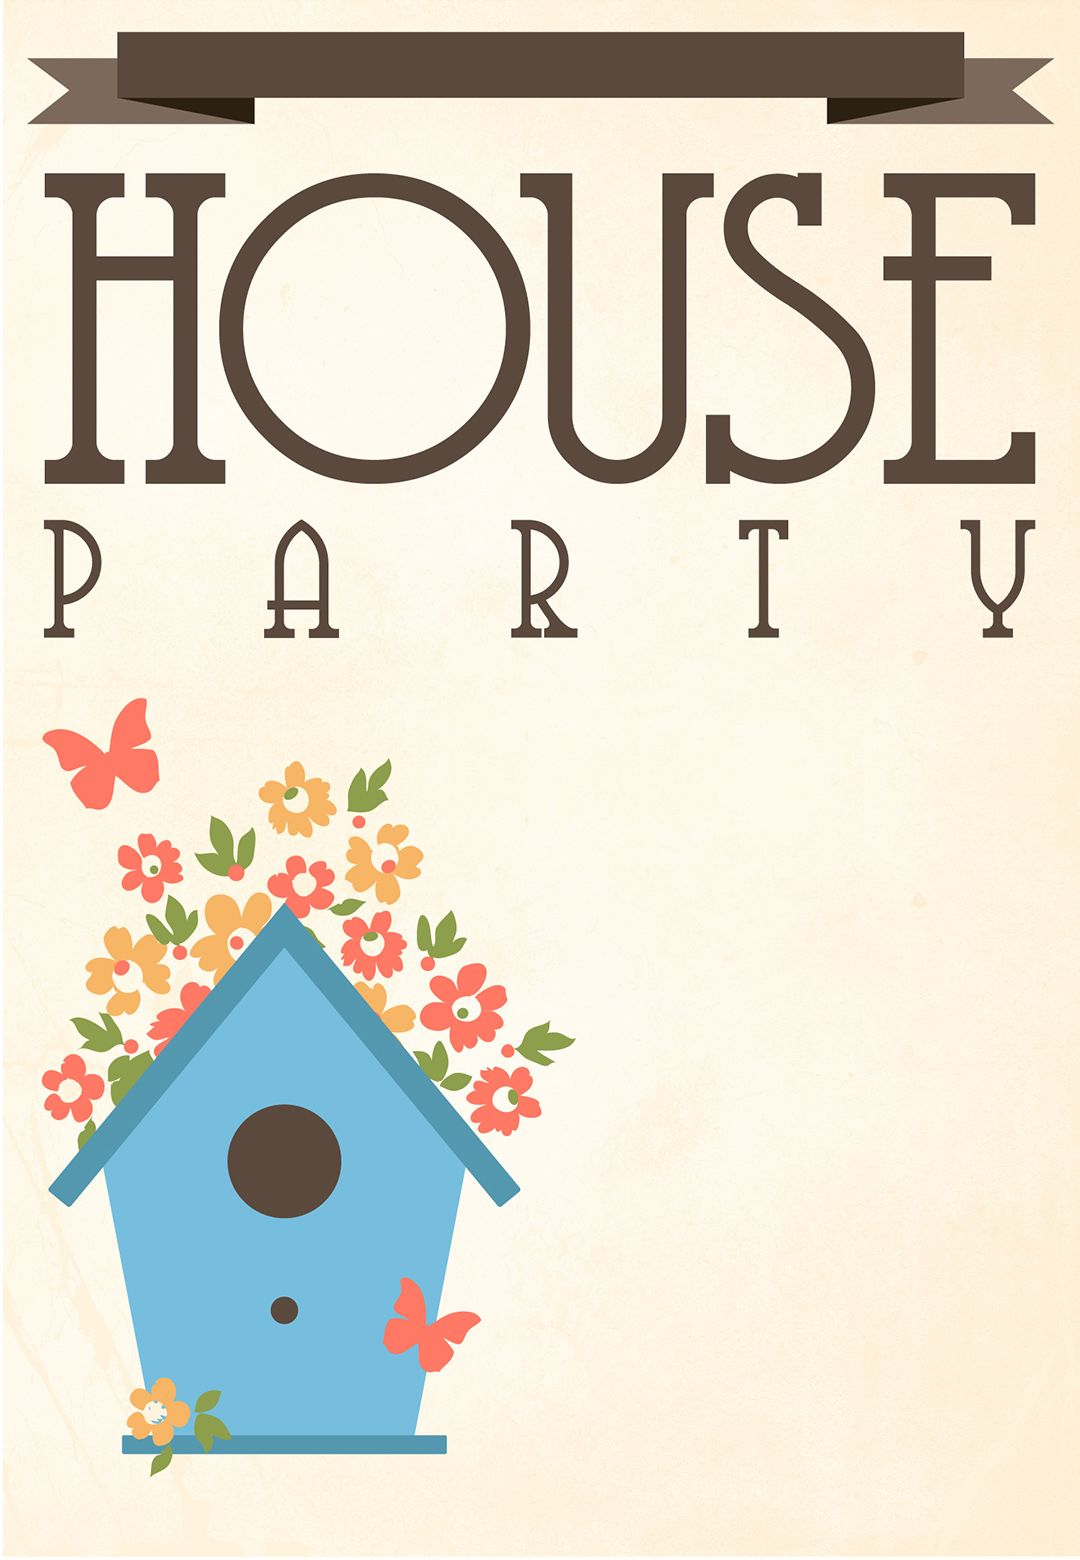 House Party Invitation Template • Business Template Ideas